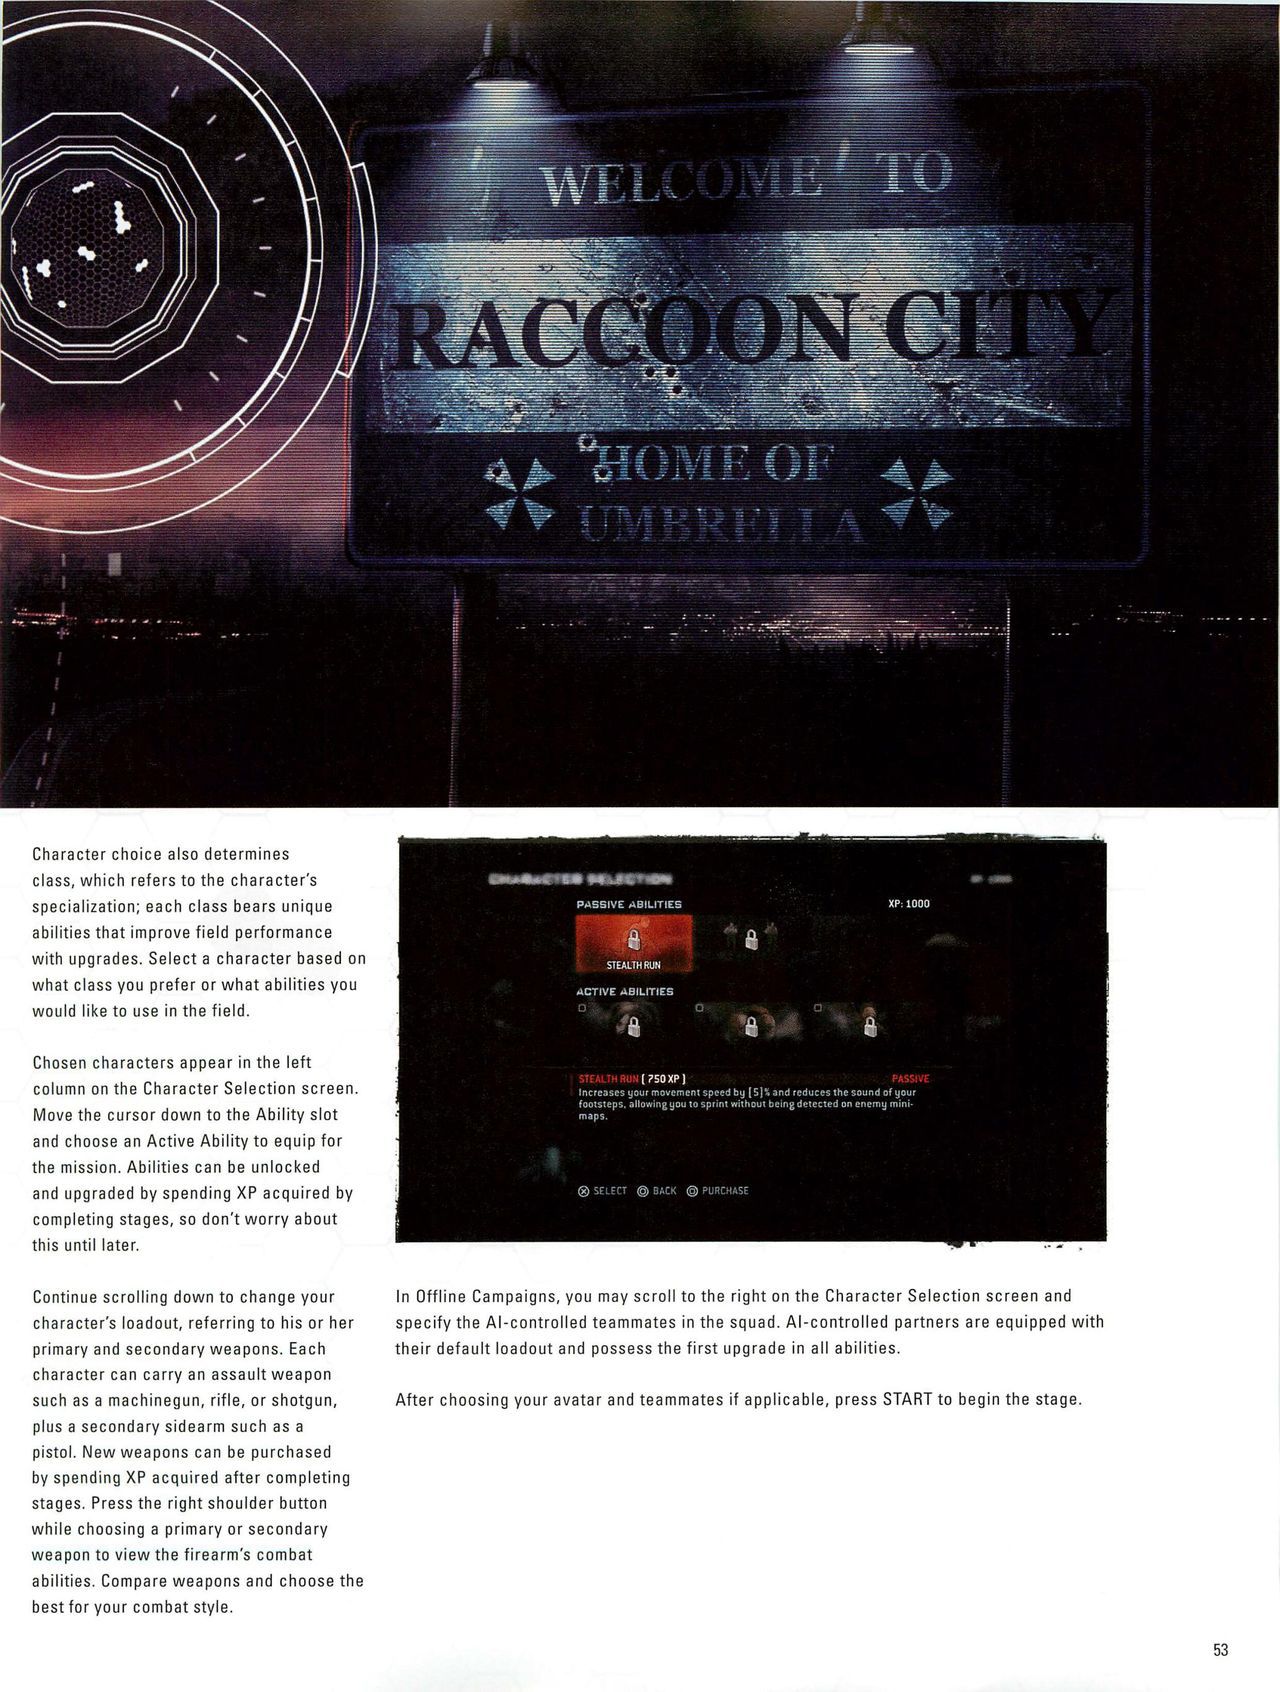 Resident Evil: Operation Raccoon City Official Strategy Guide (watermarked) 55